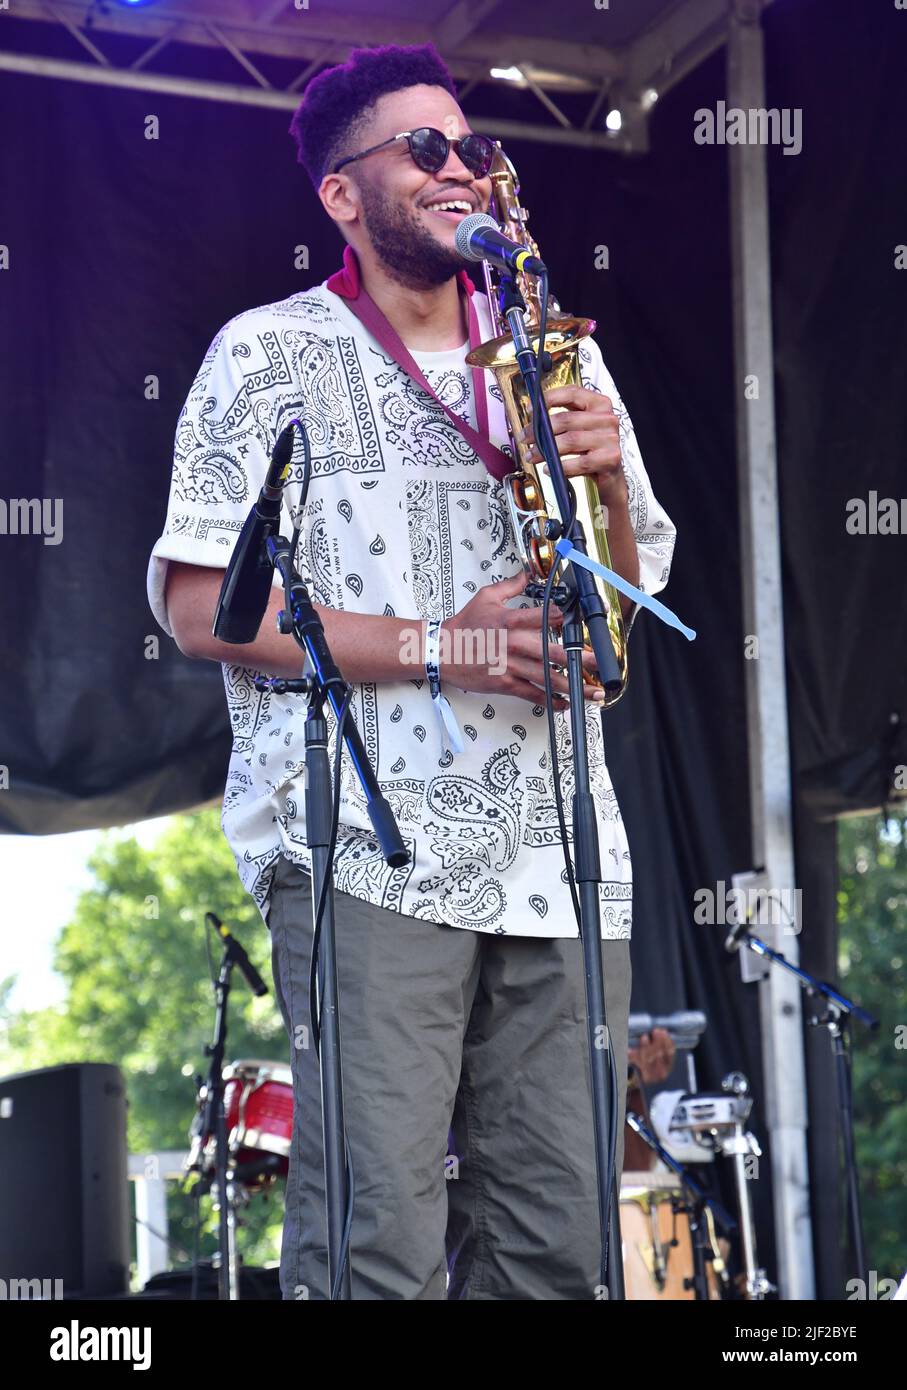 Singer, songwriter and musician Mtali Banda is shown performing on stage during a “live” concert appearance at the Green River Festival. Stock Photo